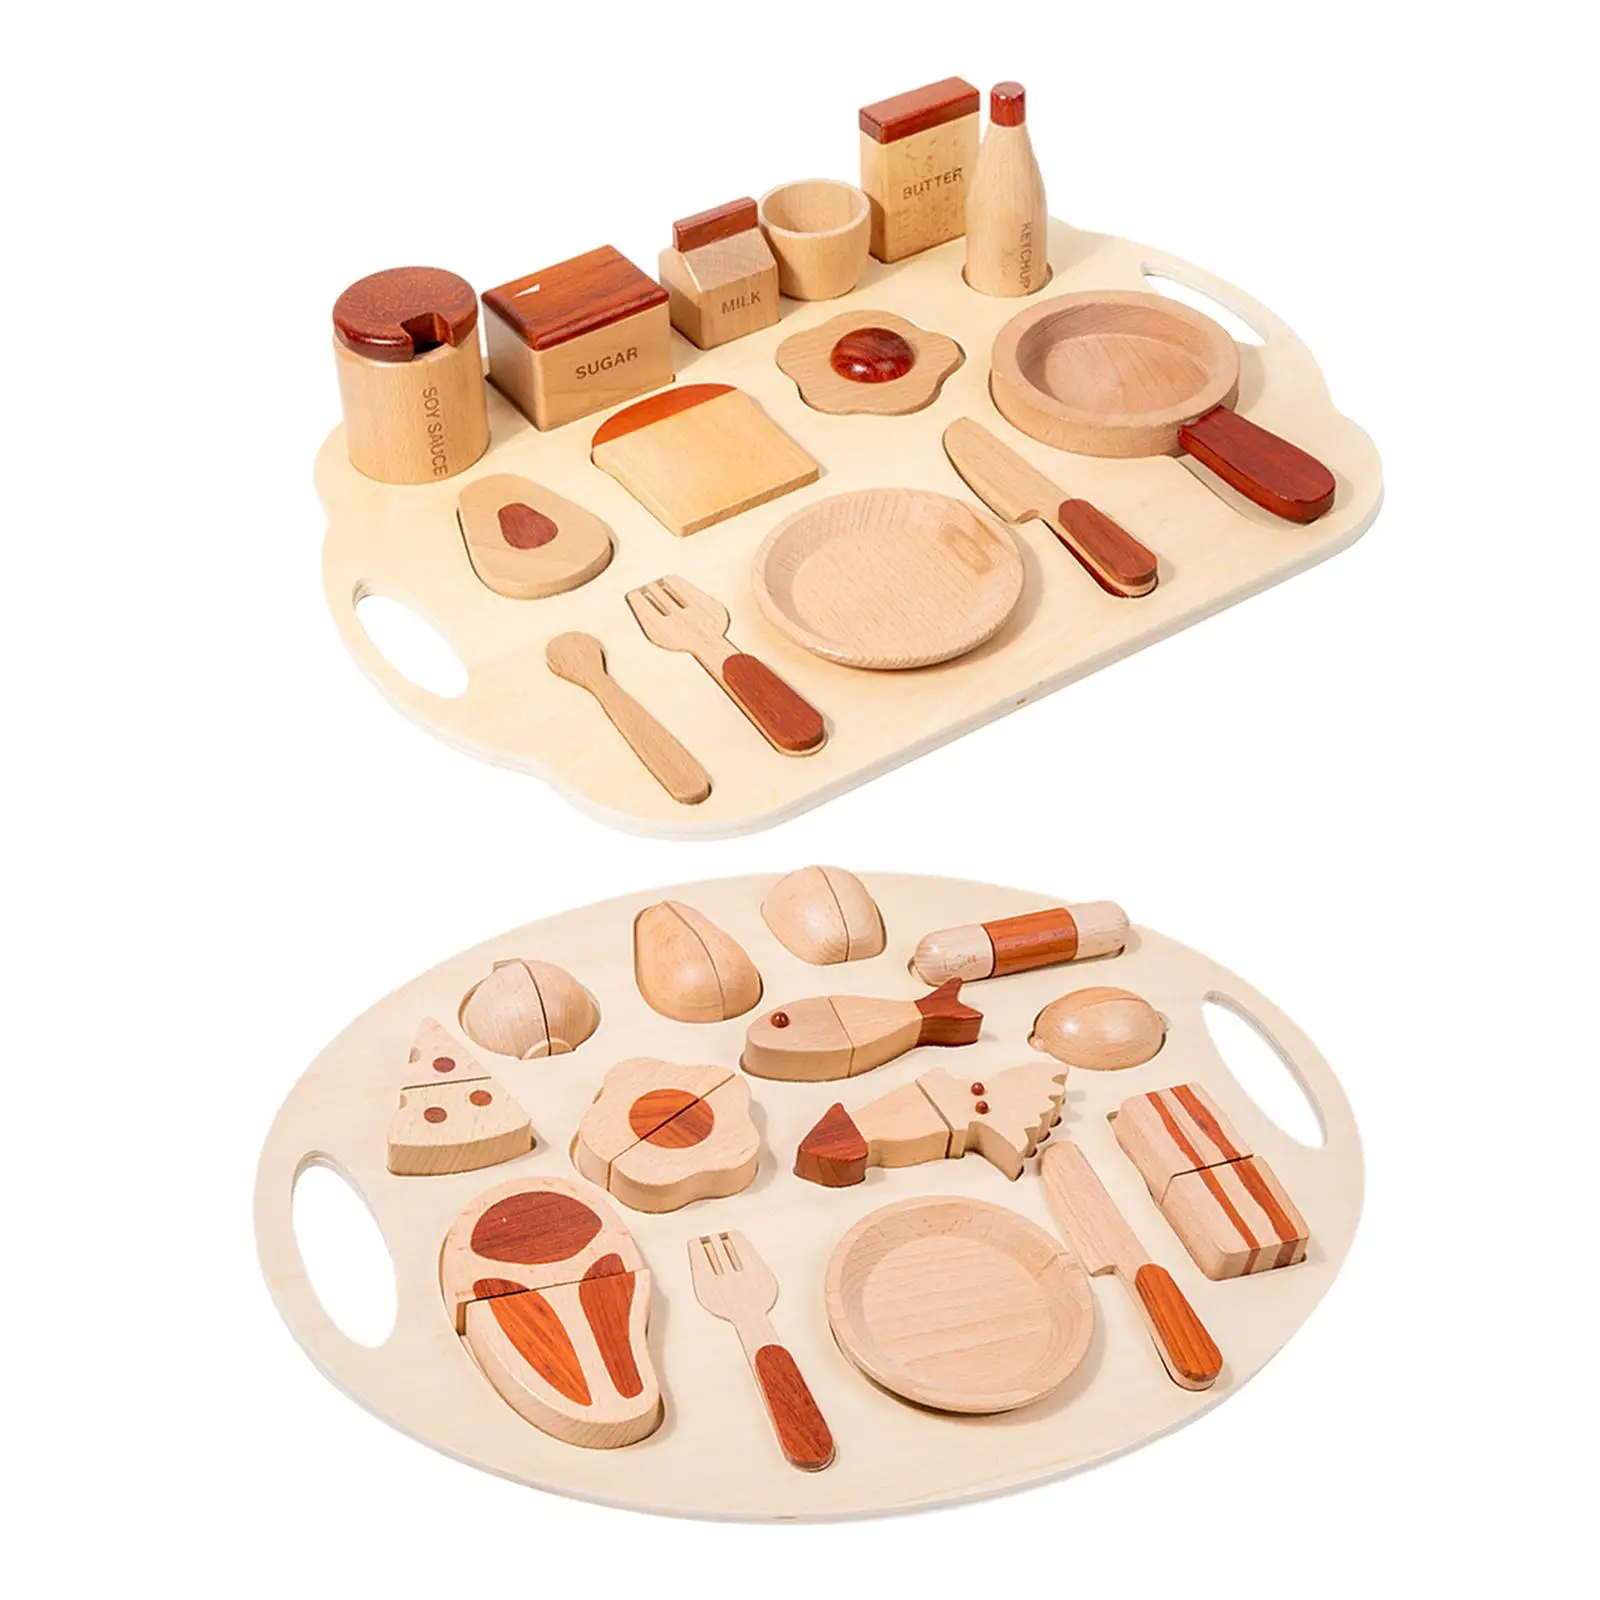 15x Cutting Meat Montessori Educational Toys for Girls Toddlers Children